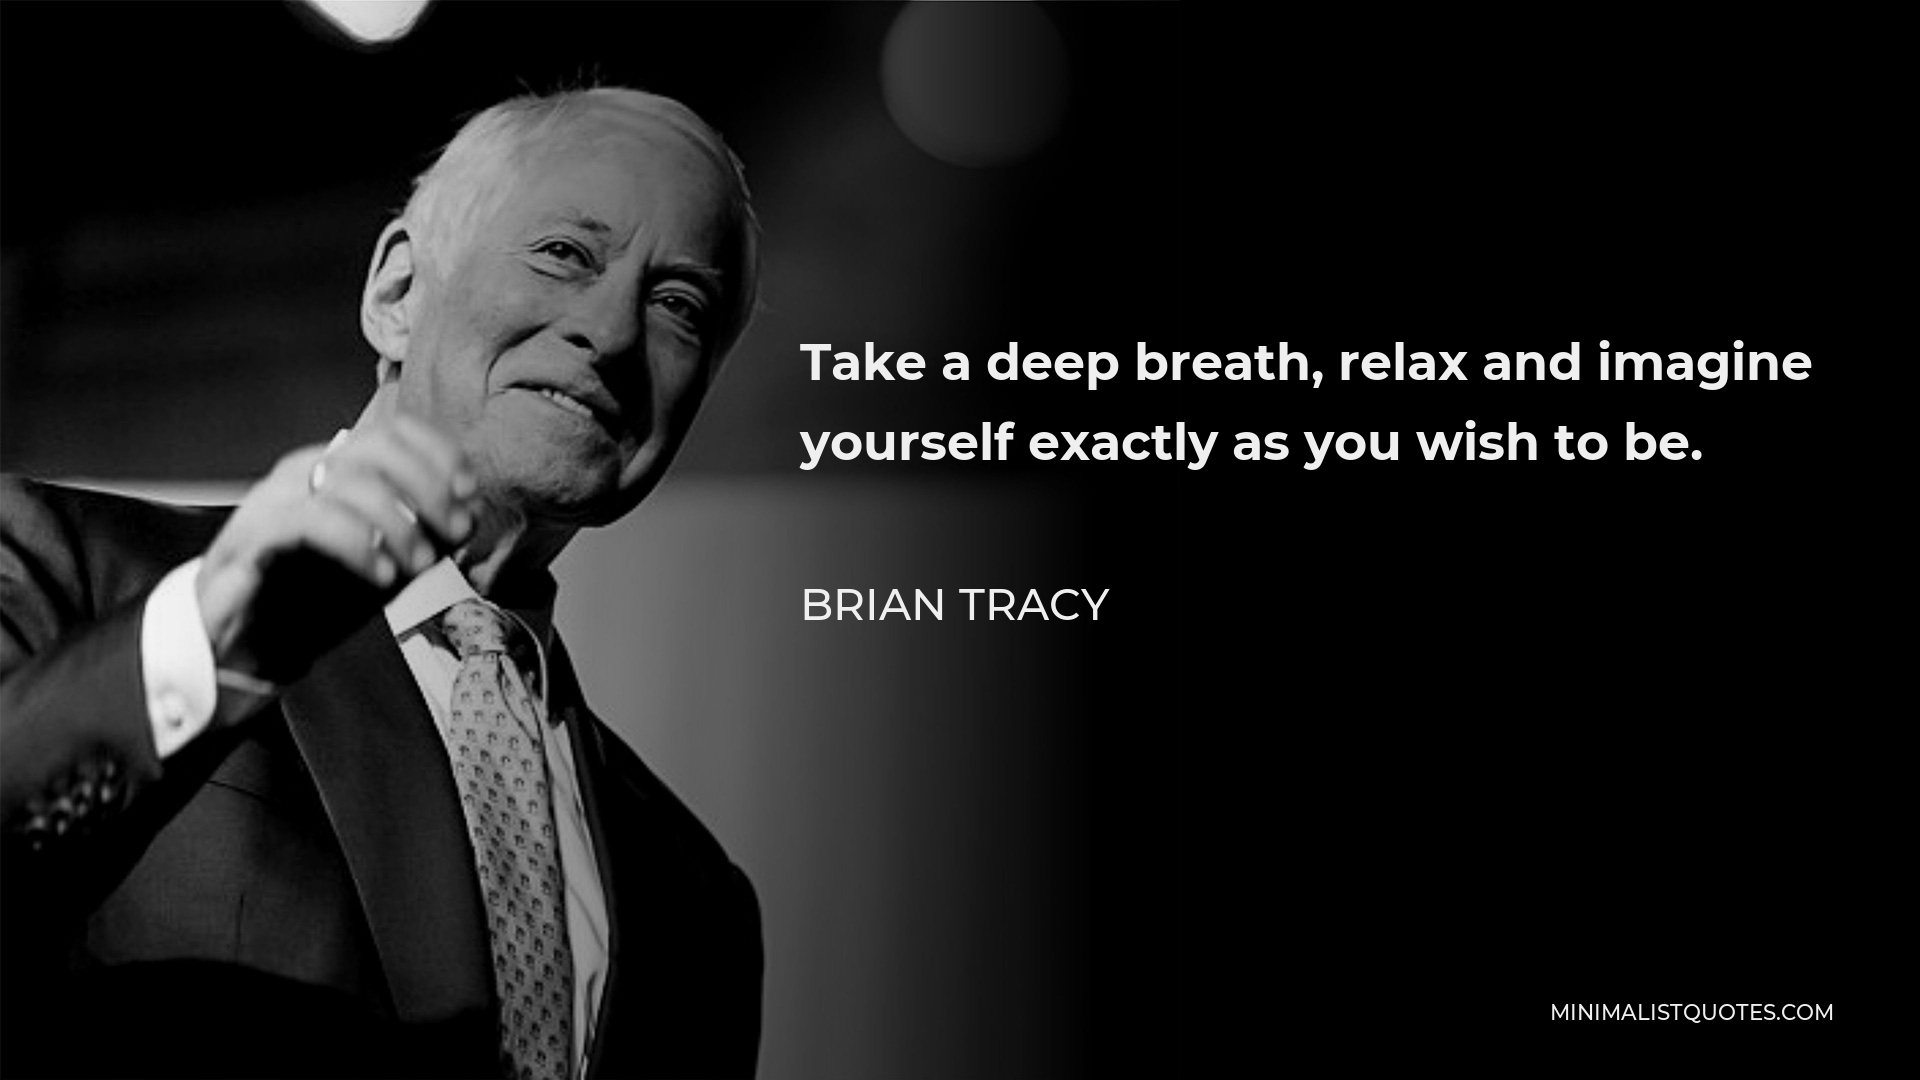 Brian Tracy Quote - Take a deep breath, relax and imagine yourself exactly as you wish to be.